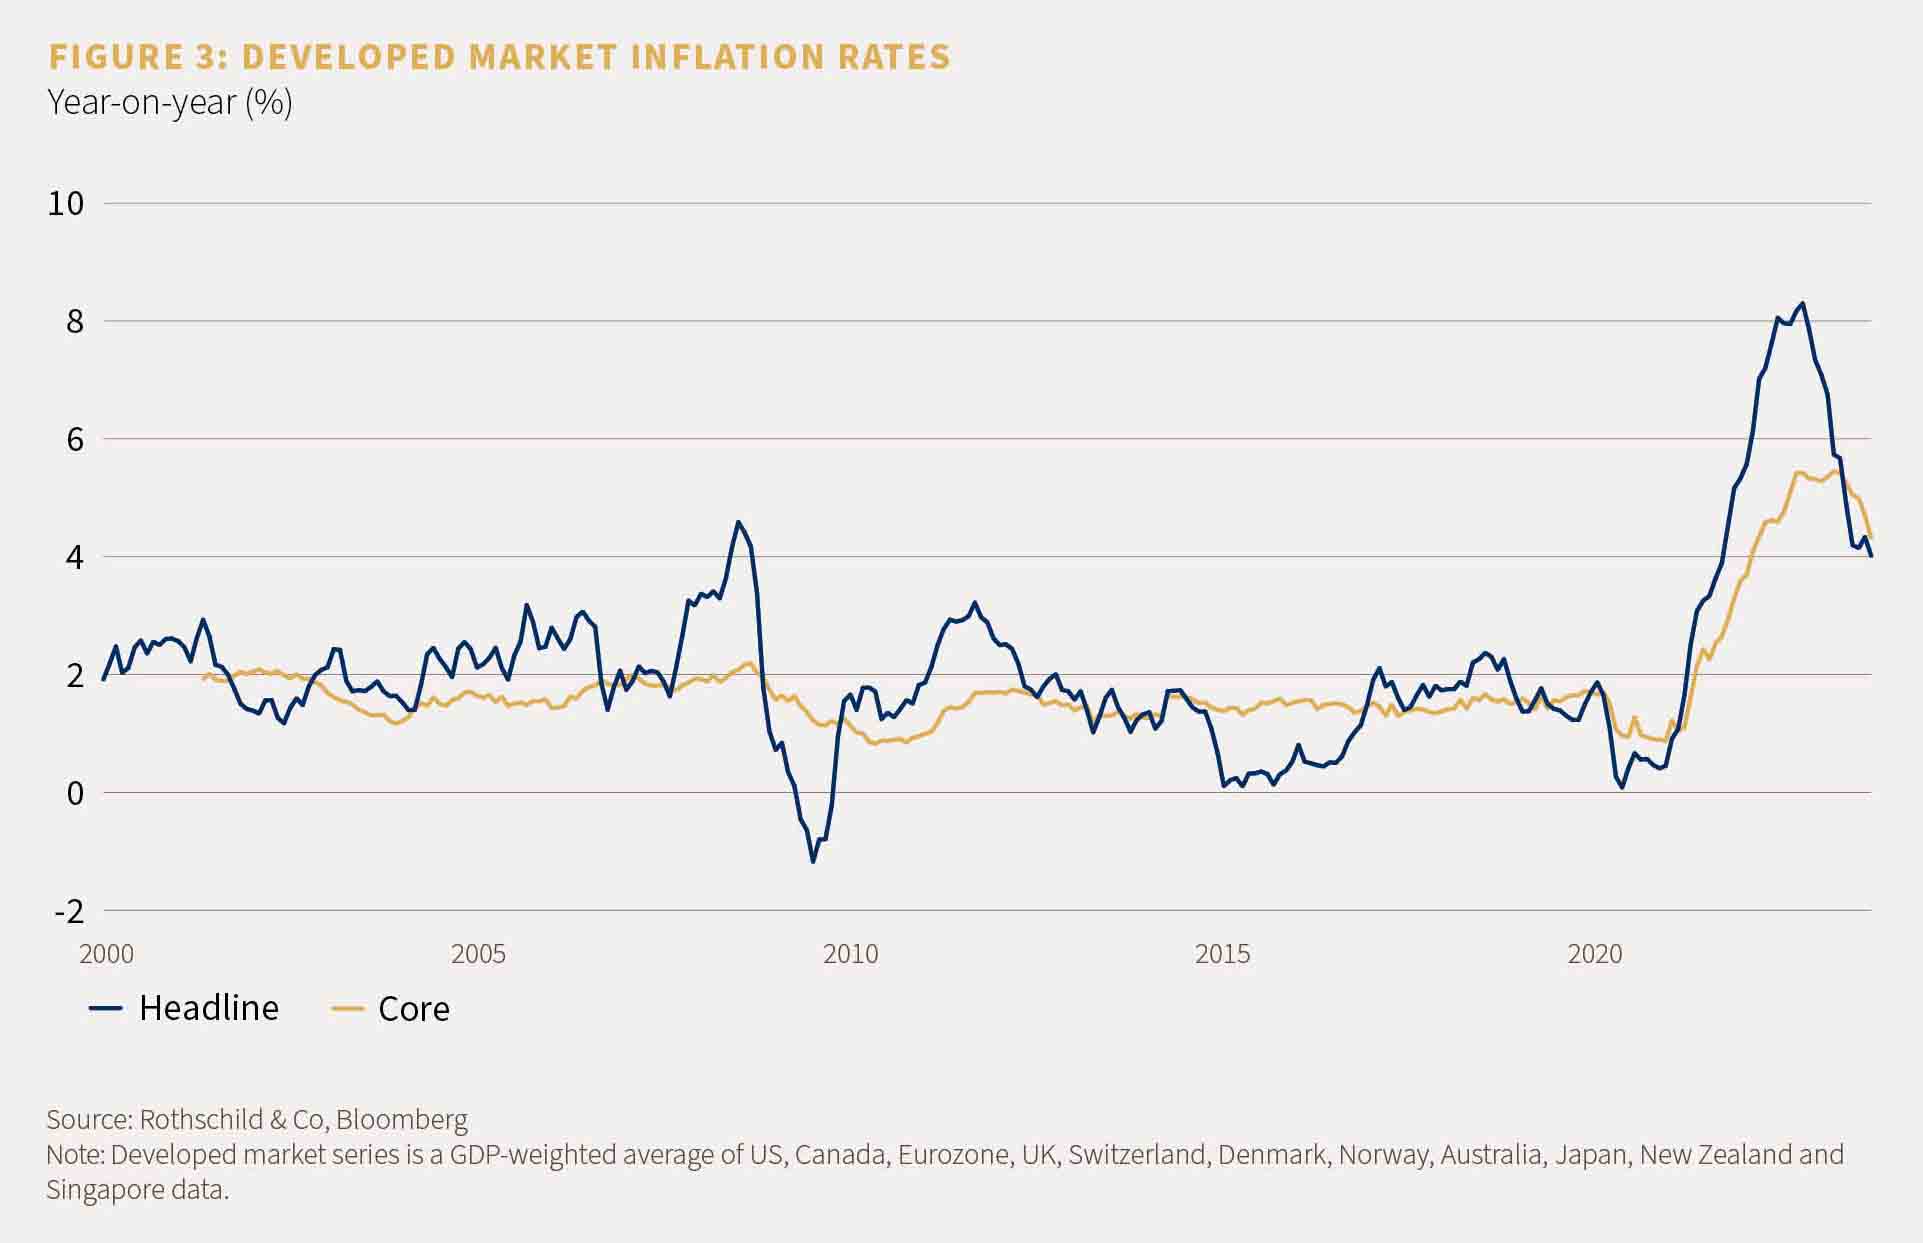 A chart to show headline and core market inflation rates year-on-year